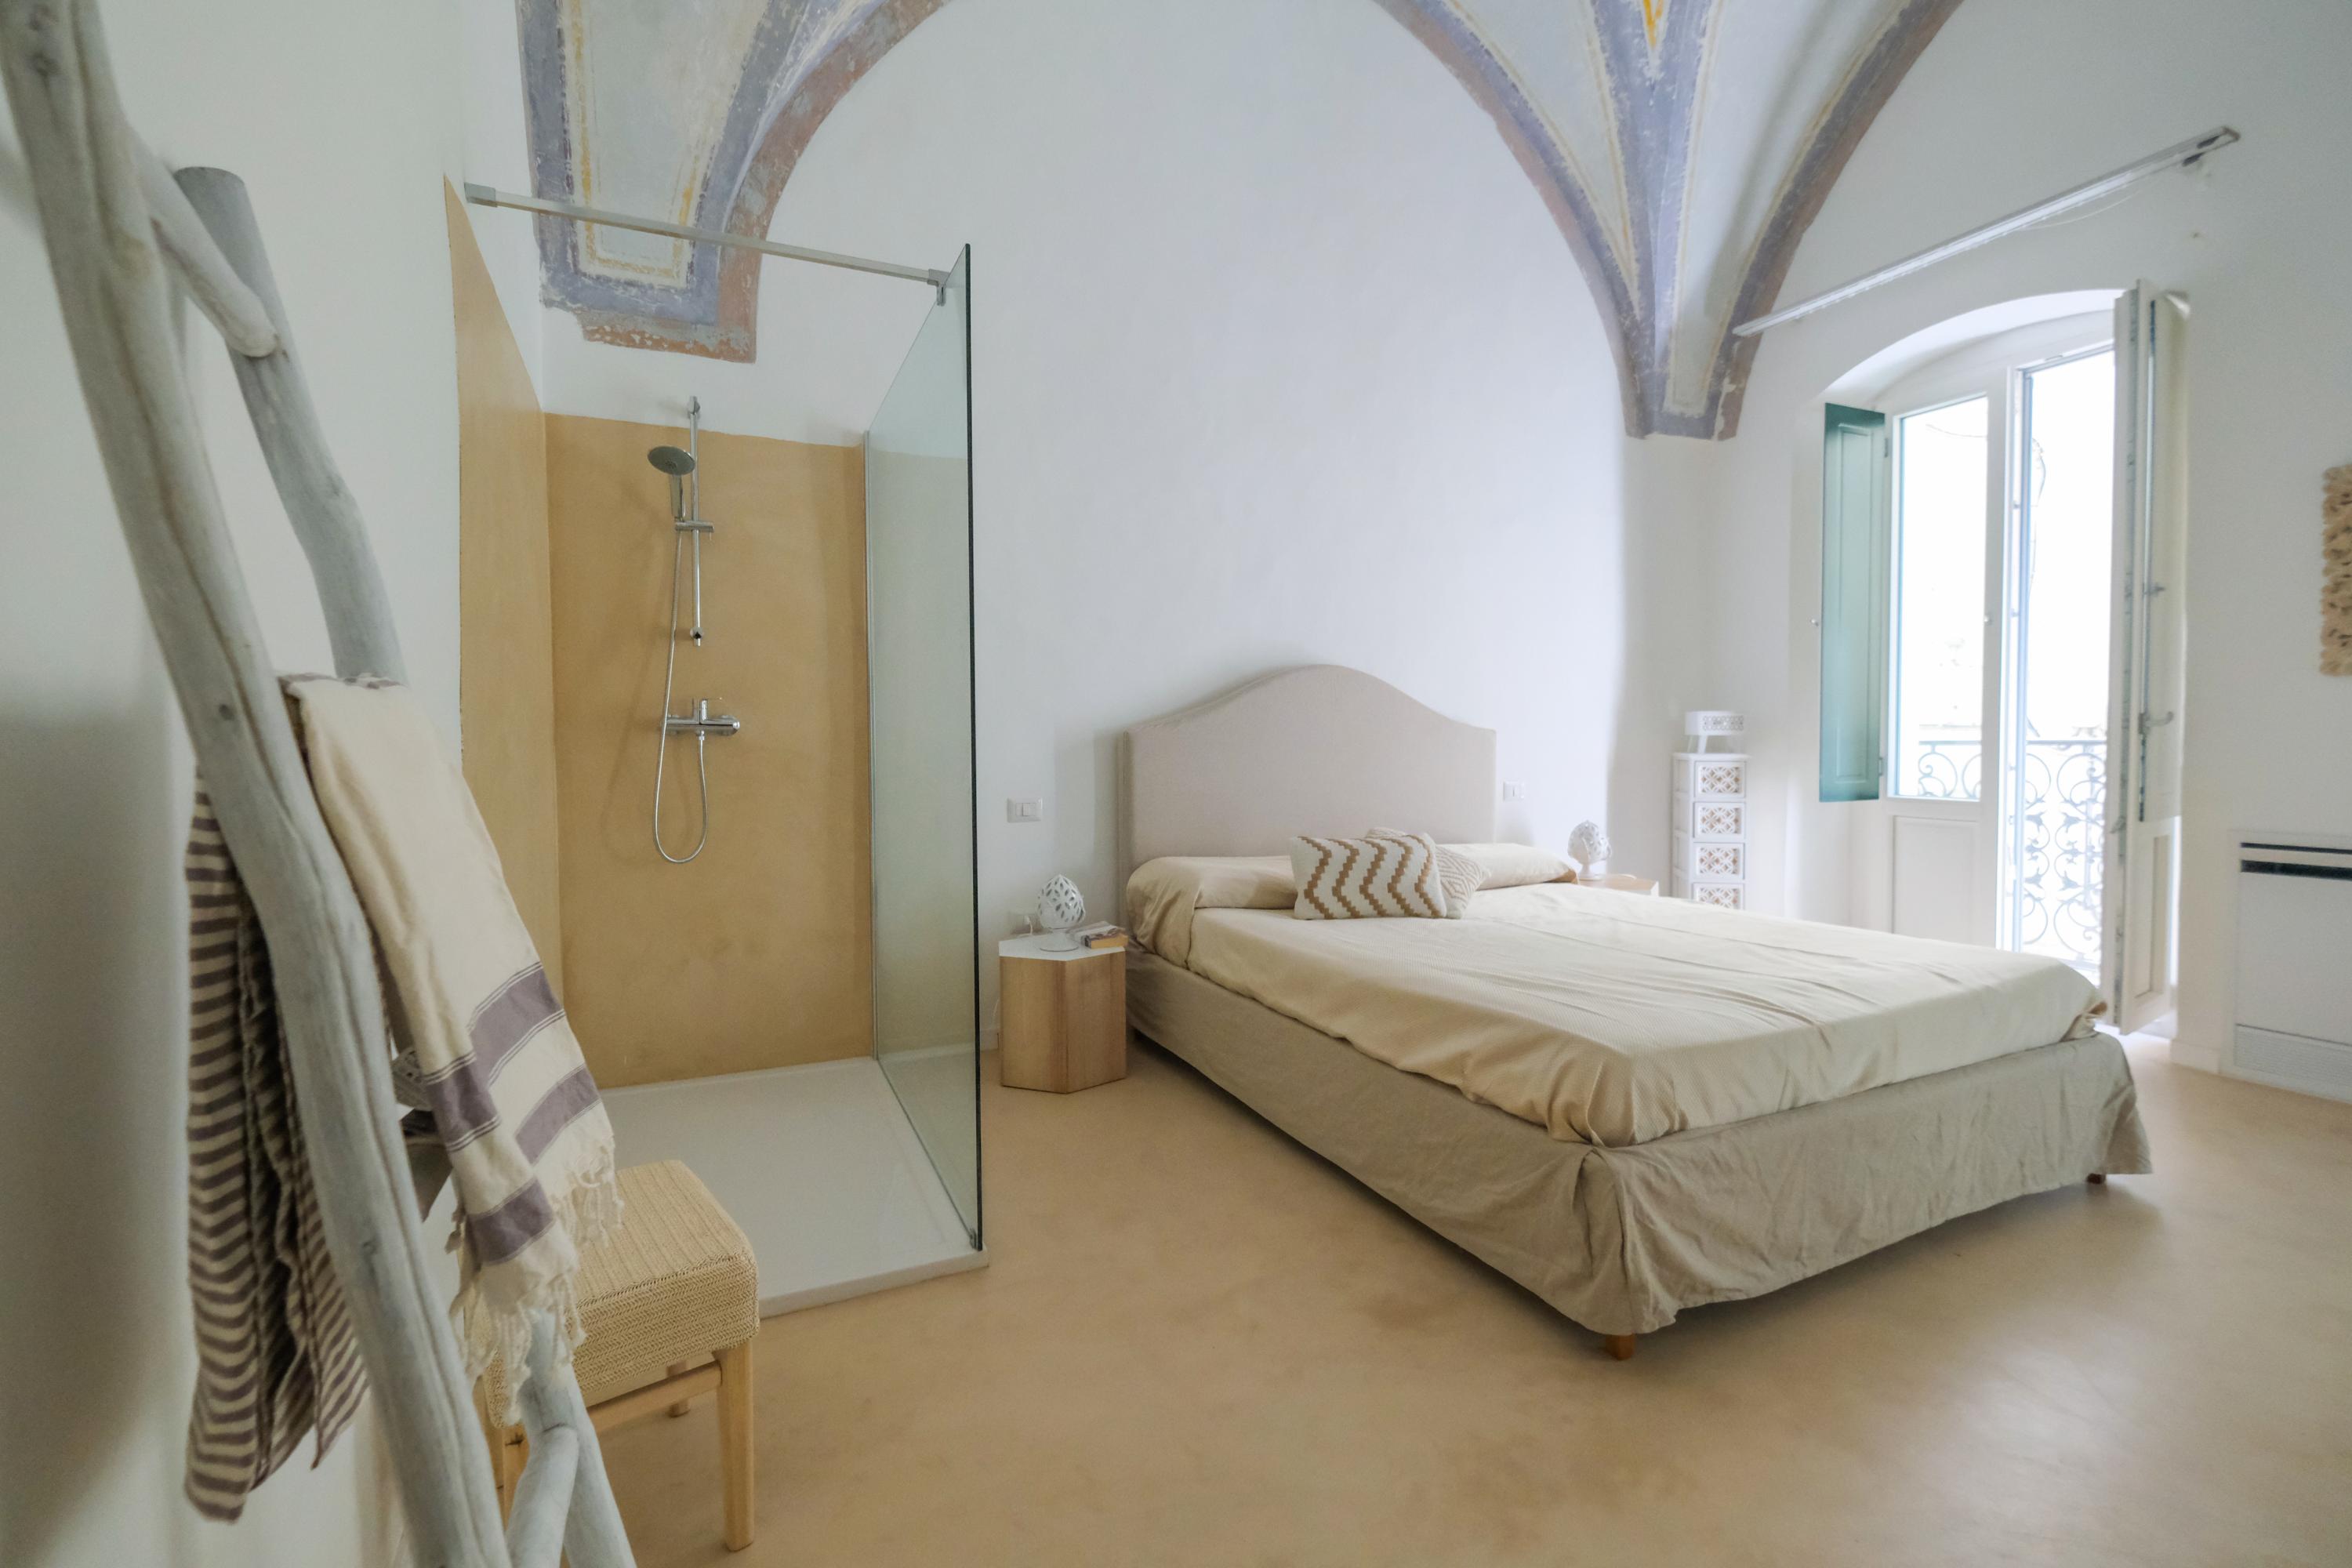 Property Image 2 - Marvelous Historic Flat with Stunning Fresco Murals